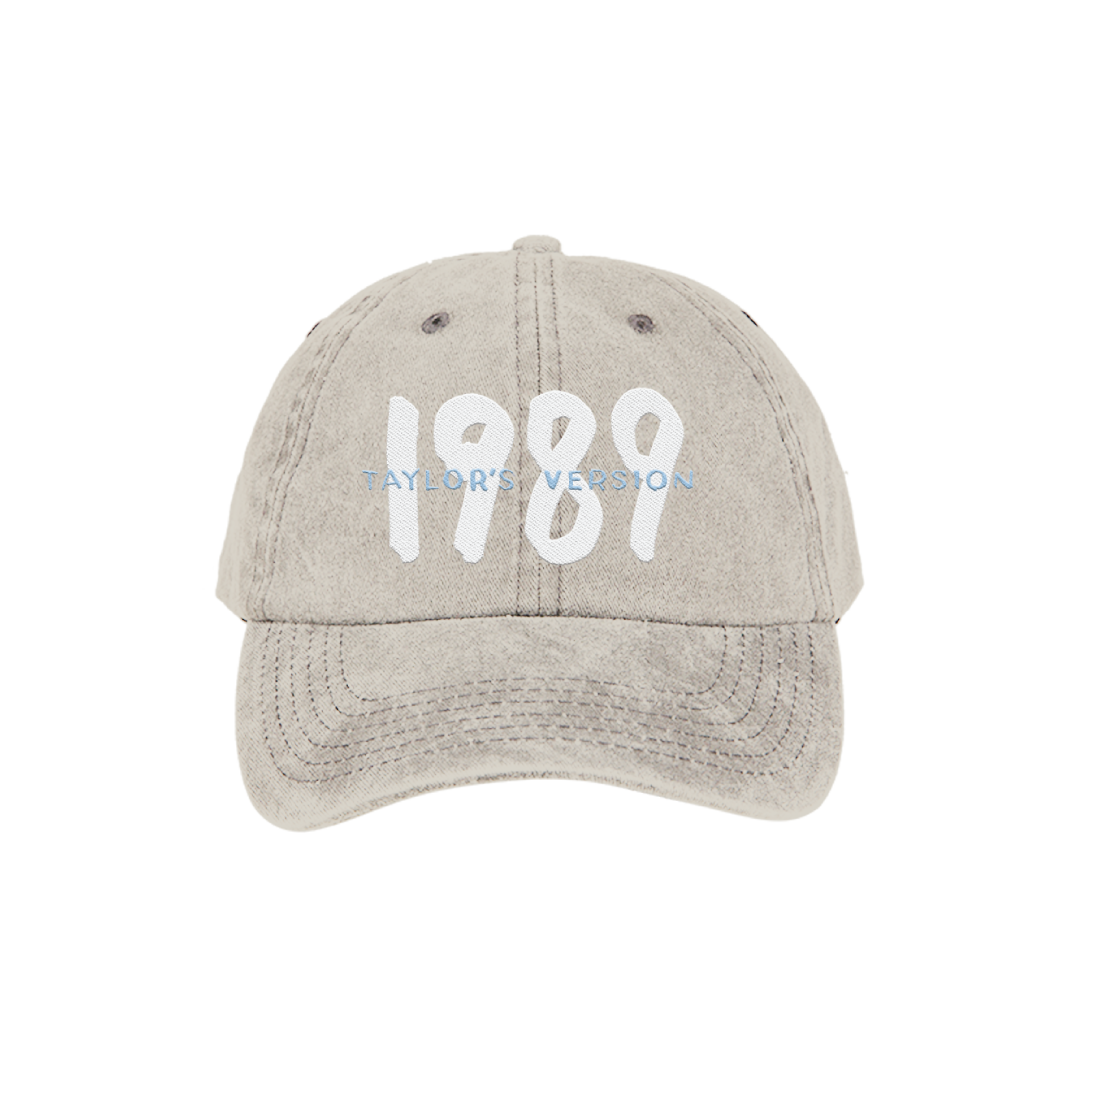 1989 (Taylor's Version) Taupe Hat